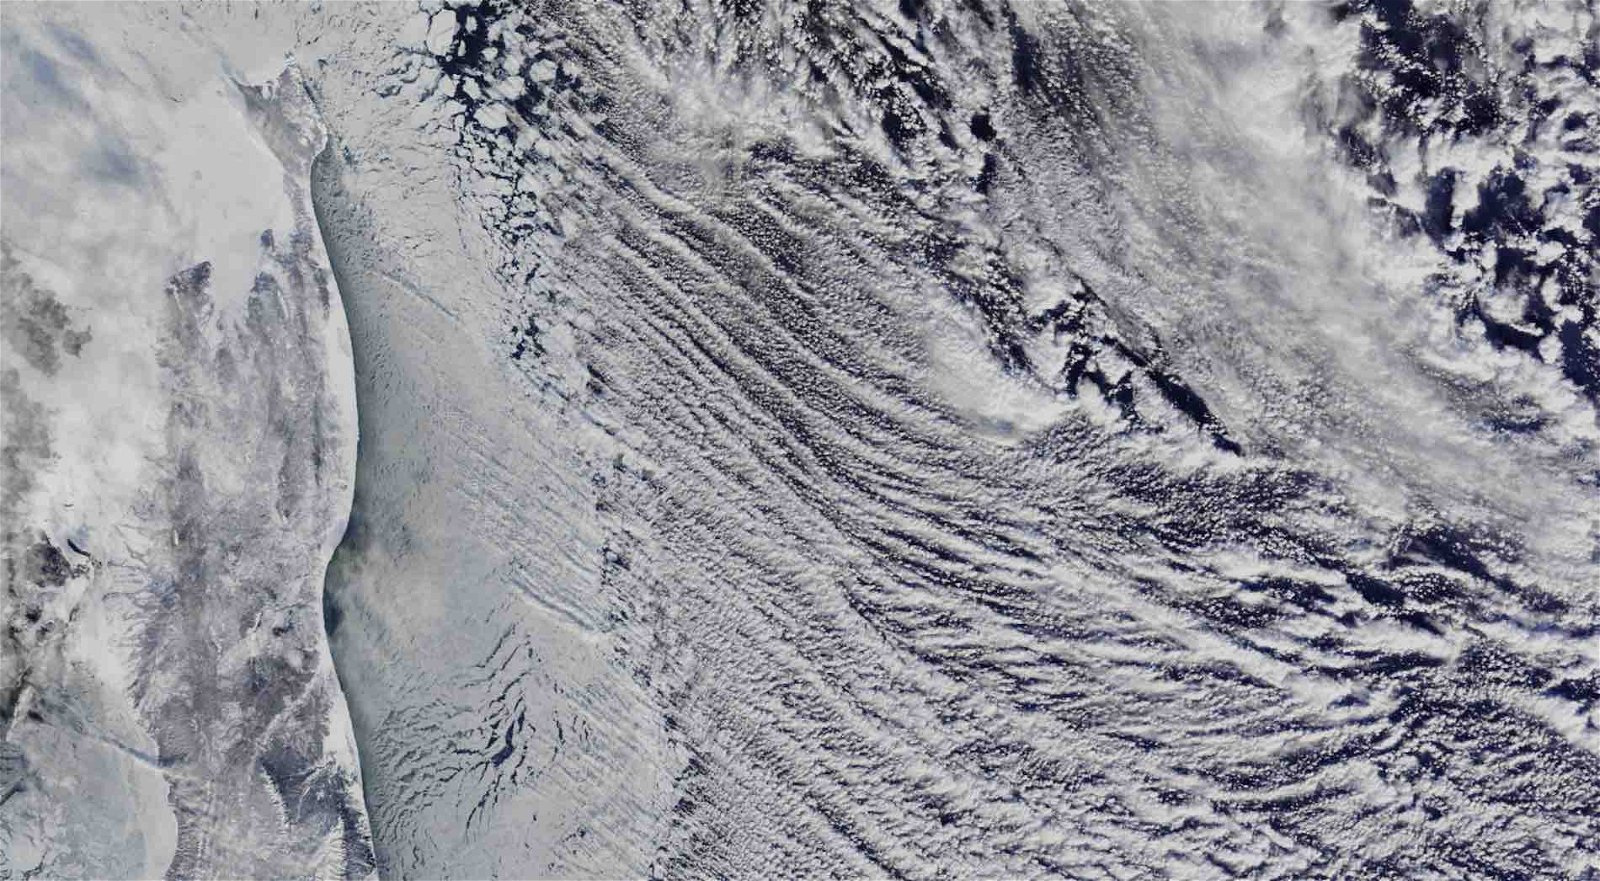 NASA satellite images have revealed something strange in the sky over Russia's east coast